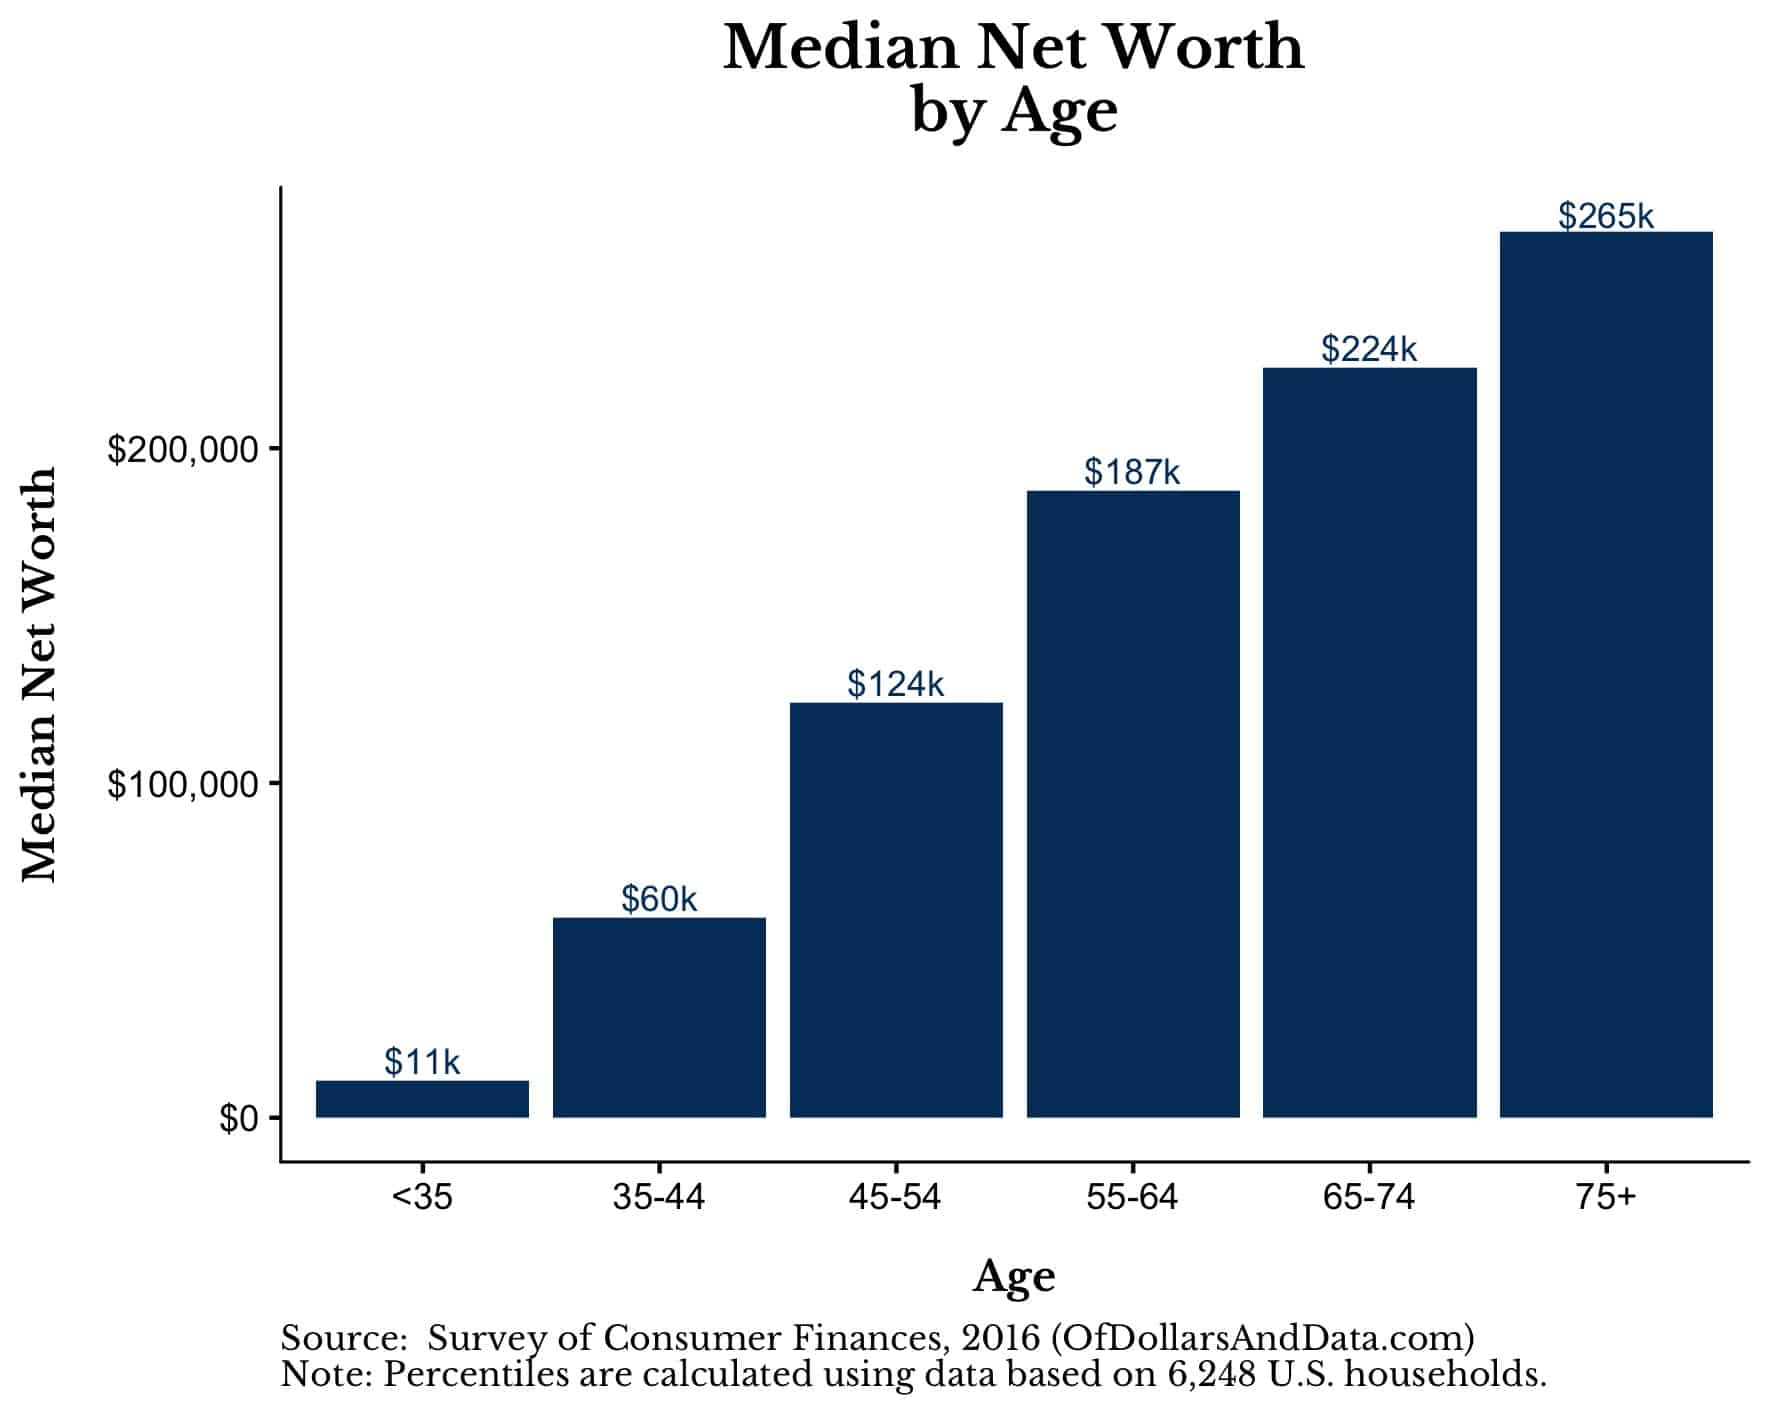 Median net worth by age, 2016 Survey of Consumer Finances